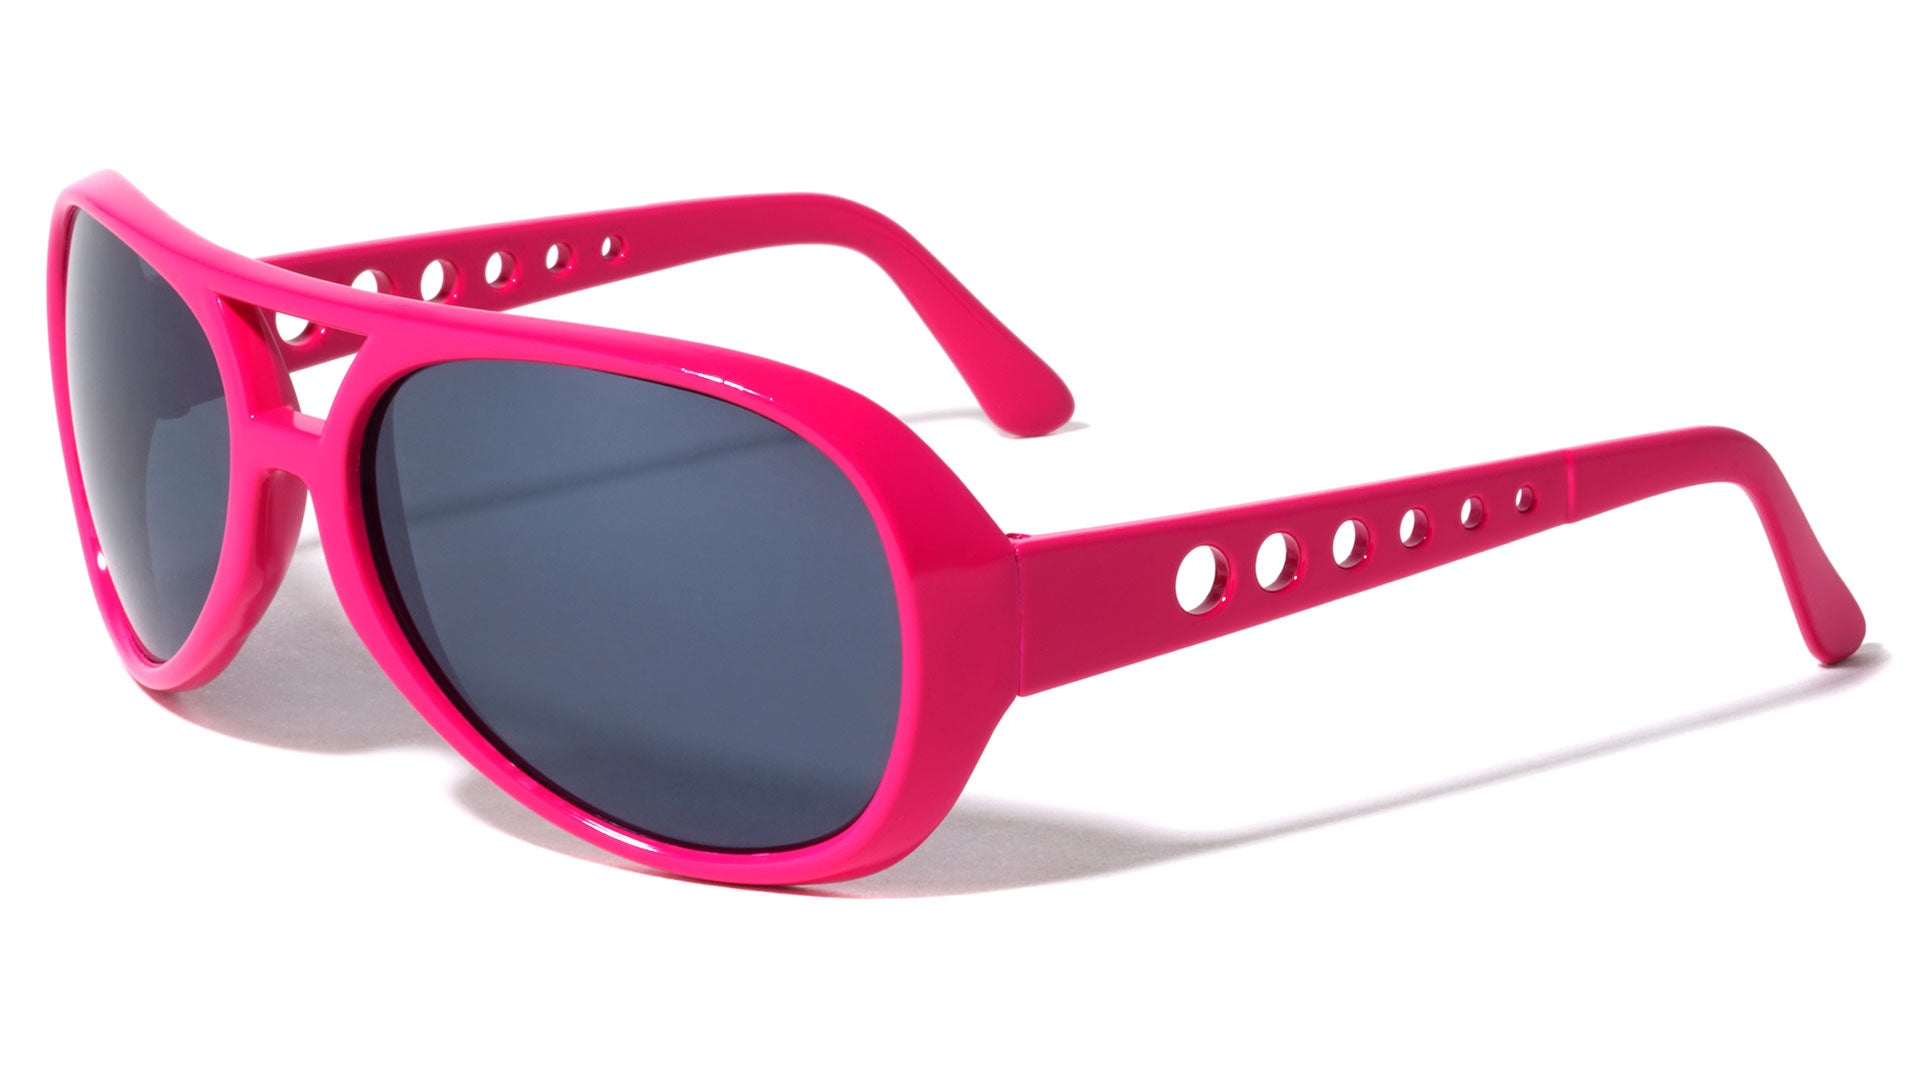 48 Pack Retro Party Sunglasses Bulk for 80s and 90s Birthday Favors (4 Neon  Colors)